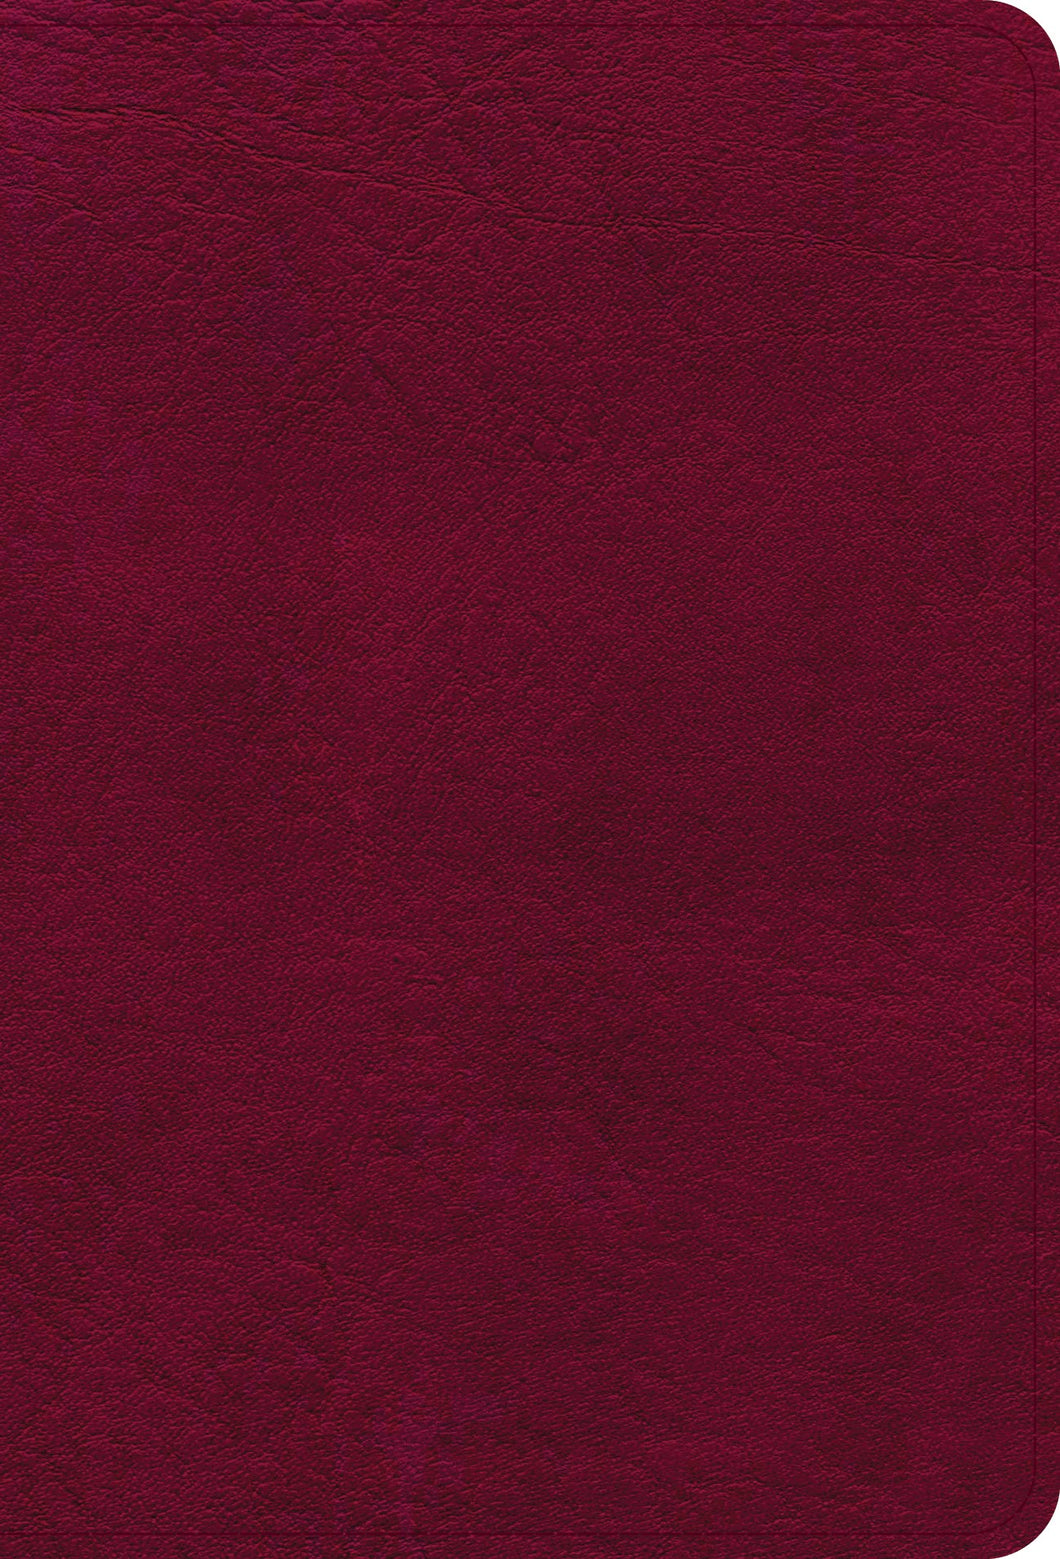 NASB 2020 Large Print Compact Reference Bible-Burgundy Leathertouch